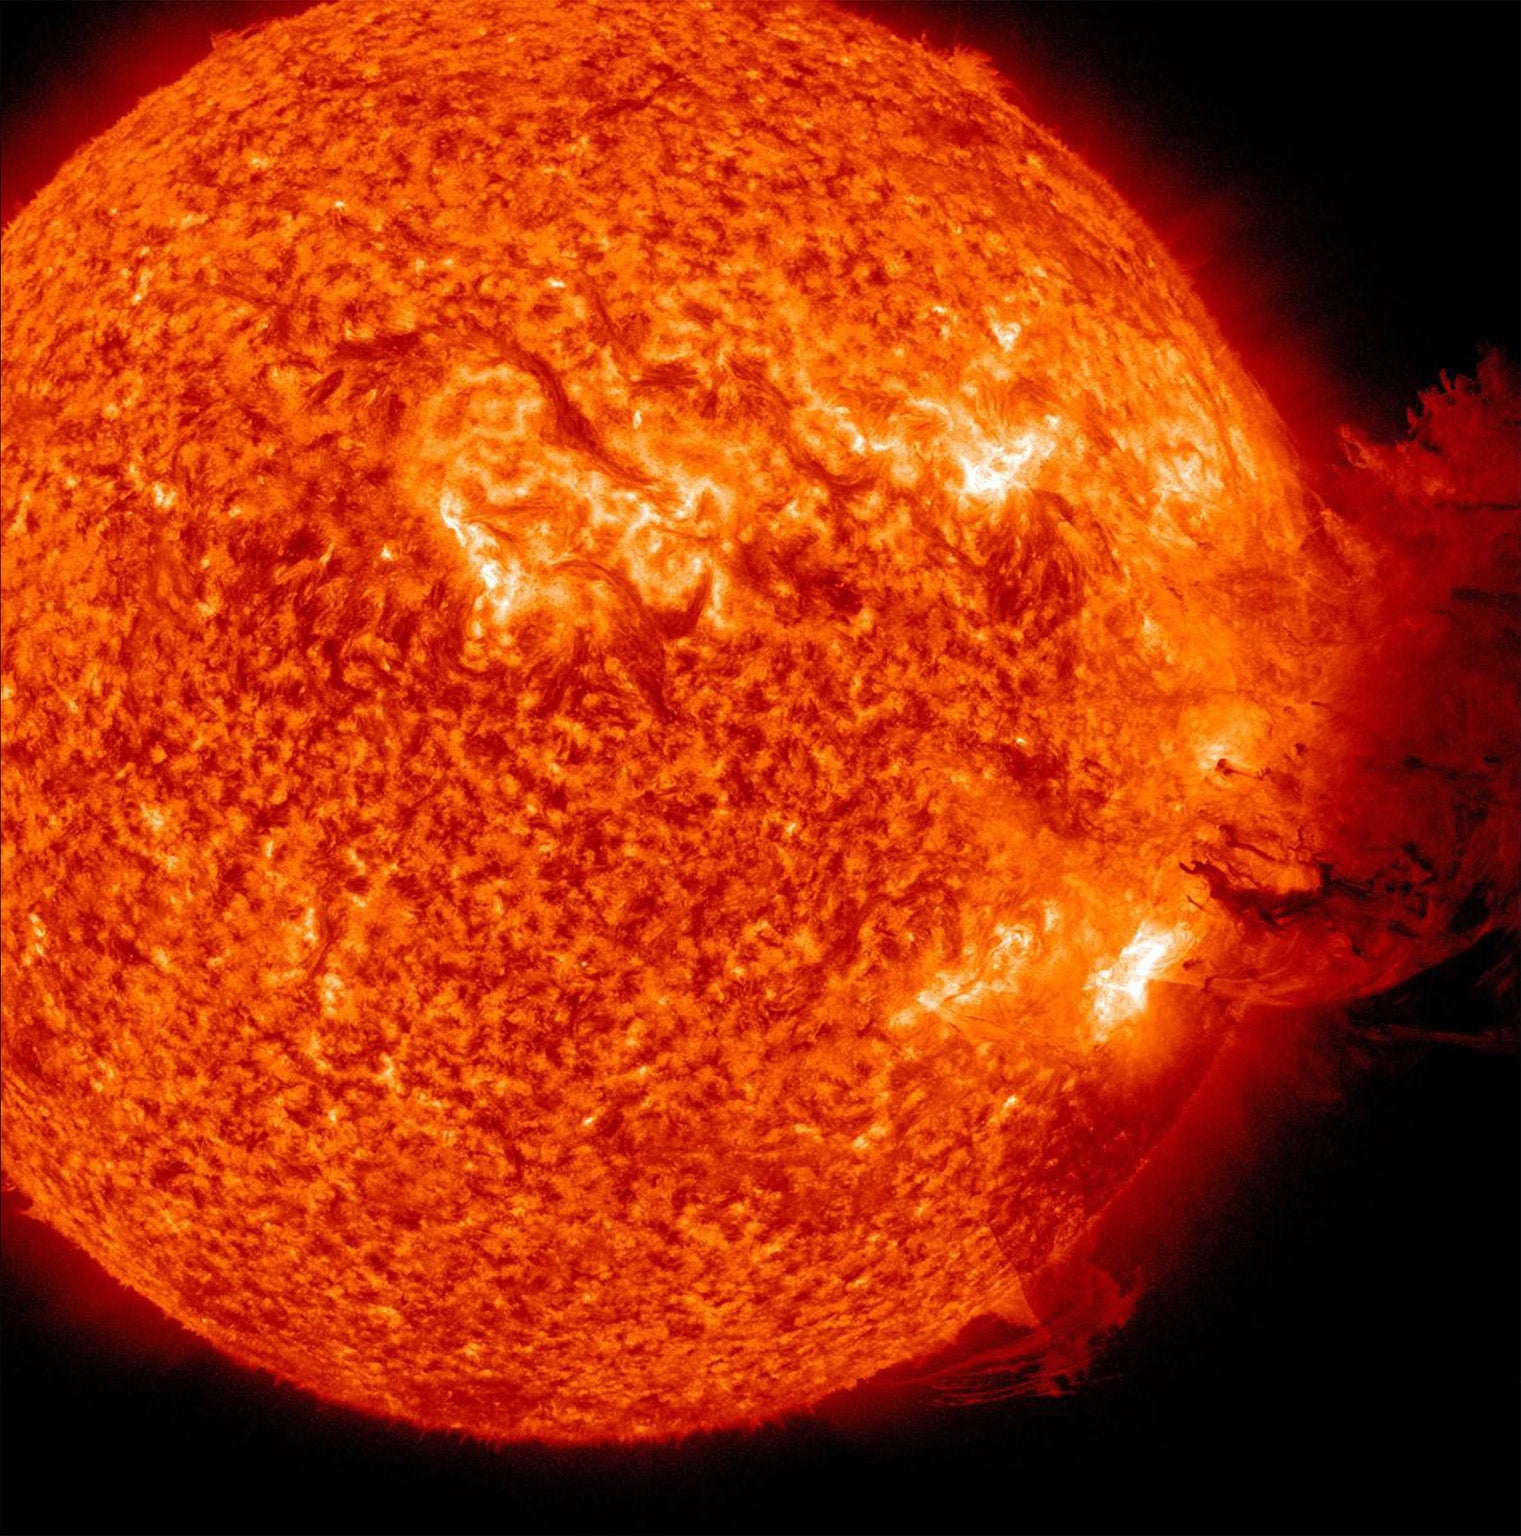 This image NASA provided image taken last June shows the Sun unleashing a solar flare, a minor radiation storm and a spectacular coronal mass ejection